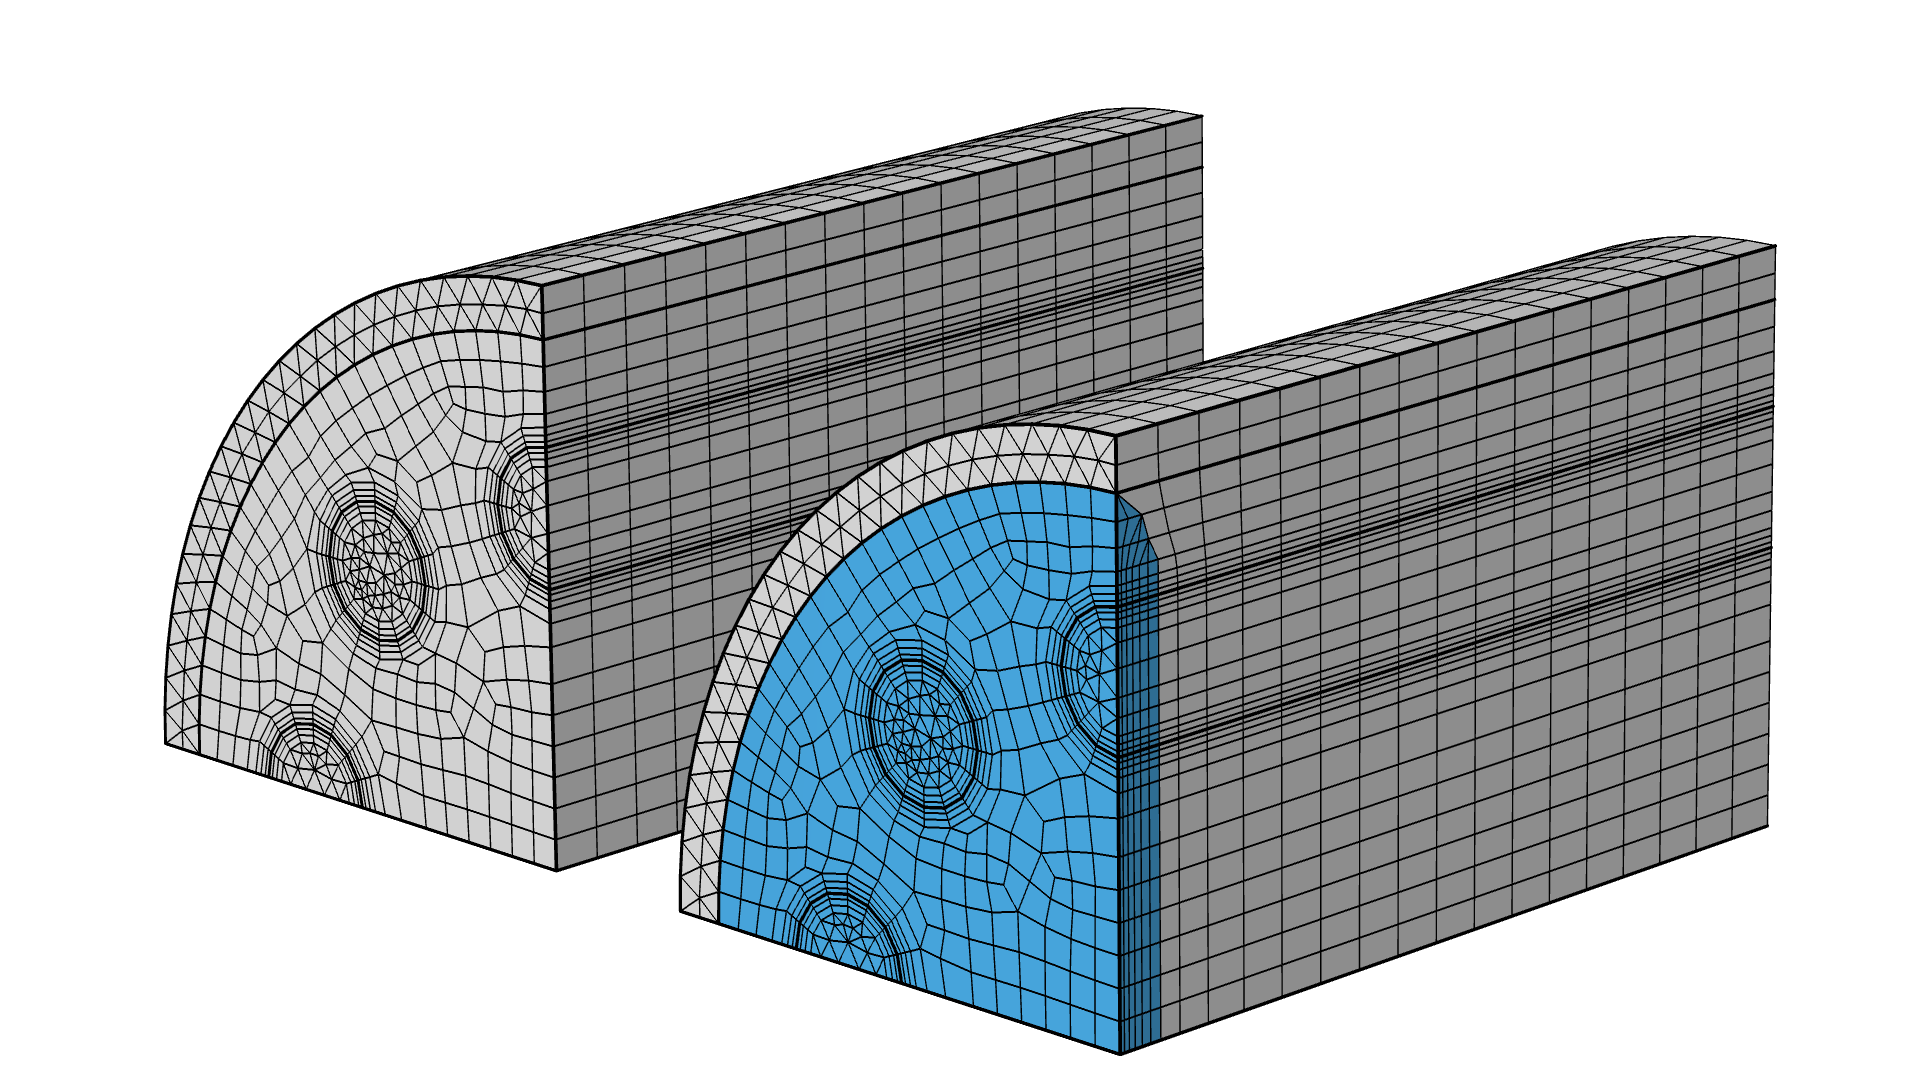 Two side-by-side figures of the Steam Reformer tutorial model geometry showing the inserted boundary layer mesh highlighted in blue on the right.